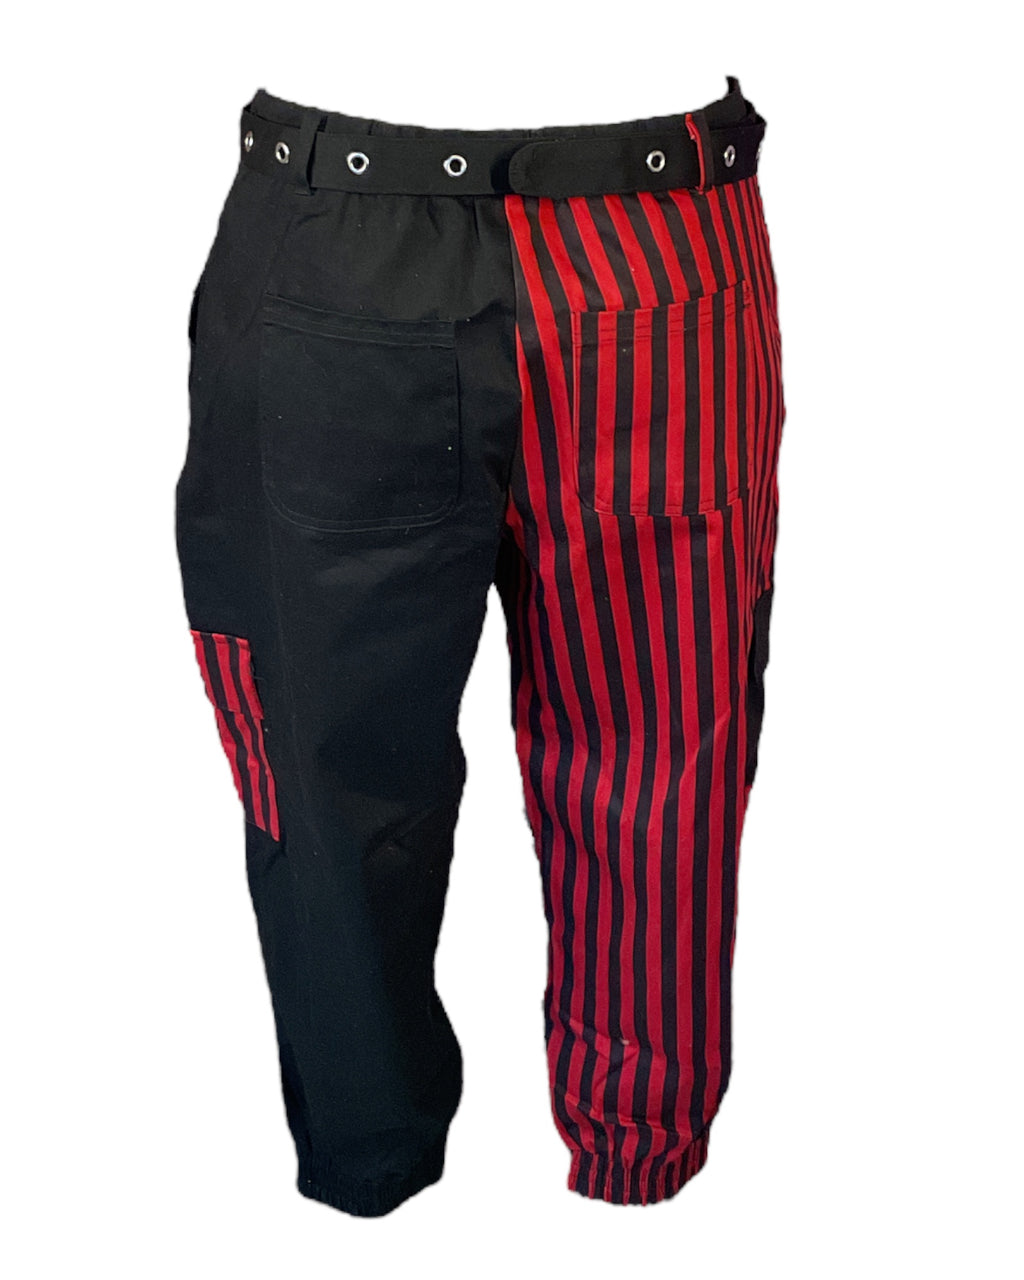 Black/Red Striped Hot Topic Cargo Pants, 1